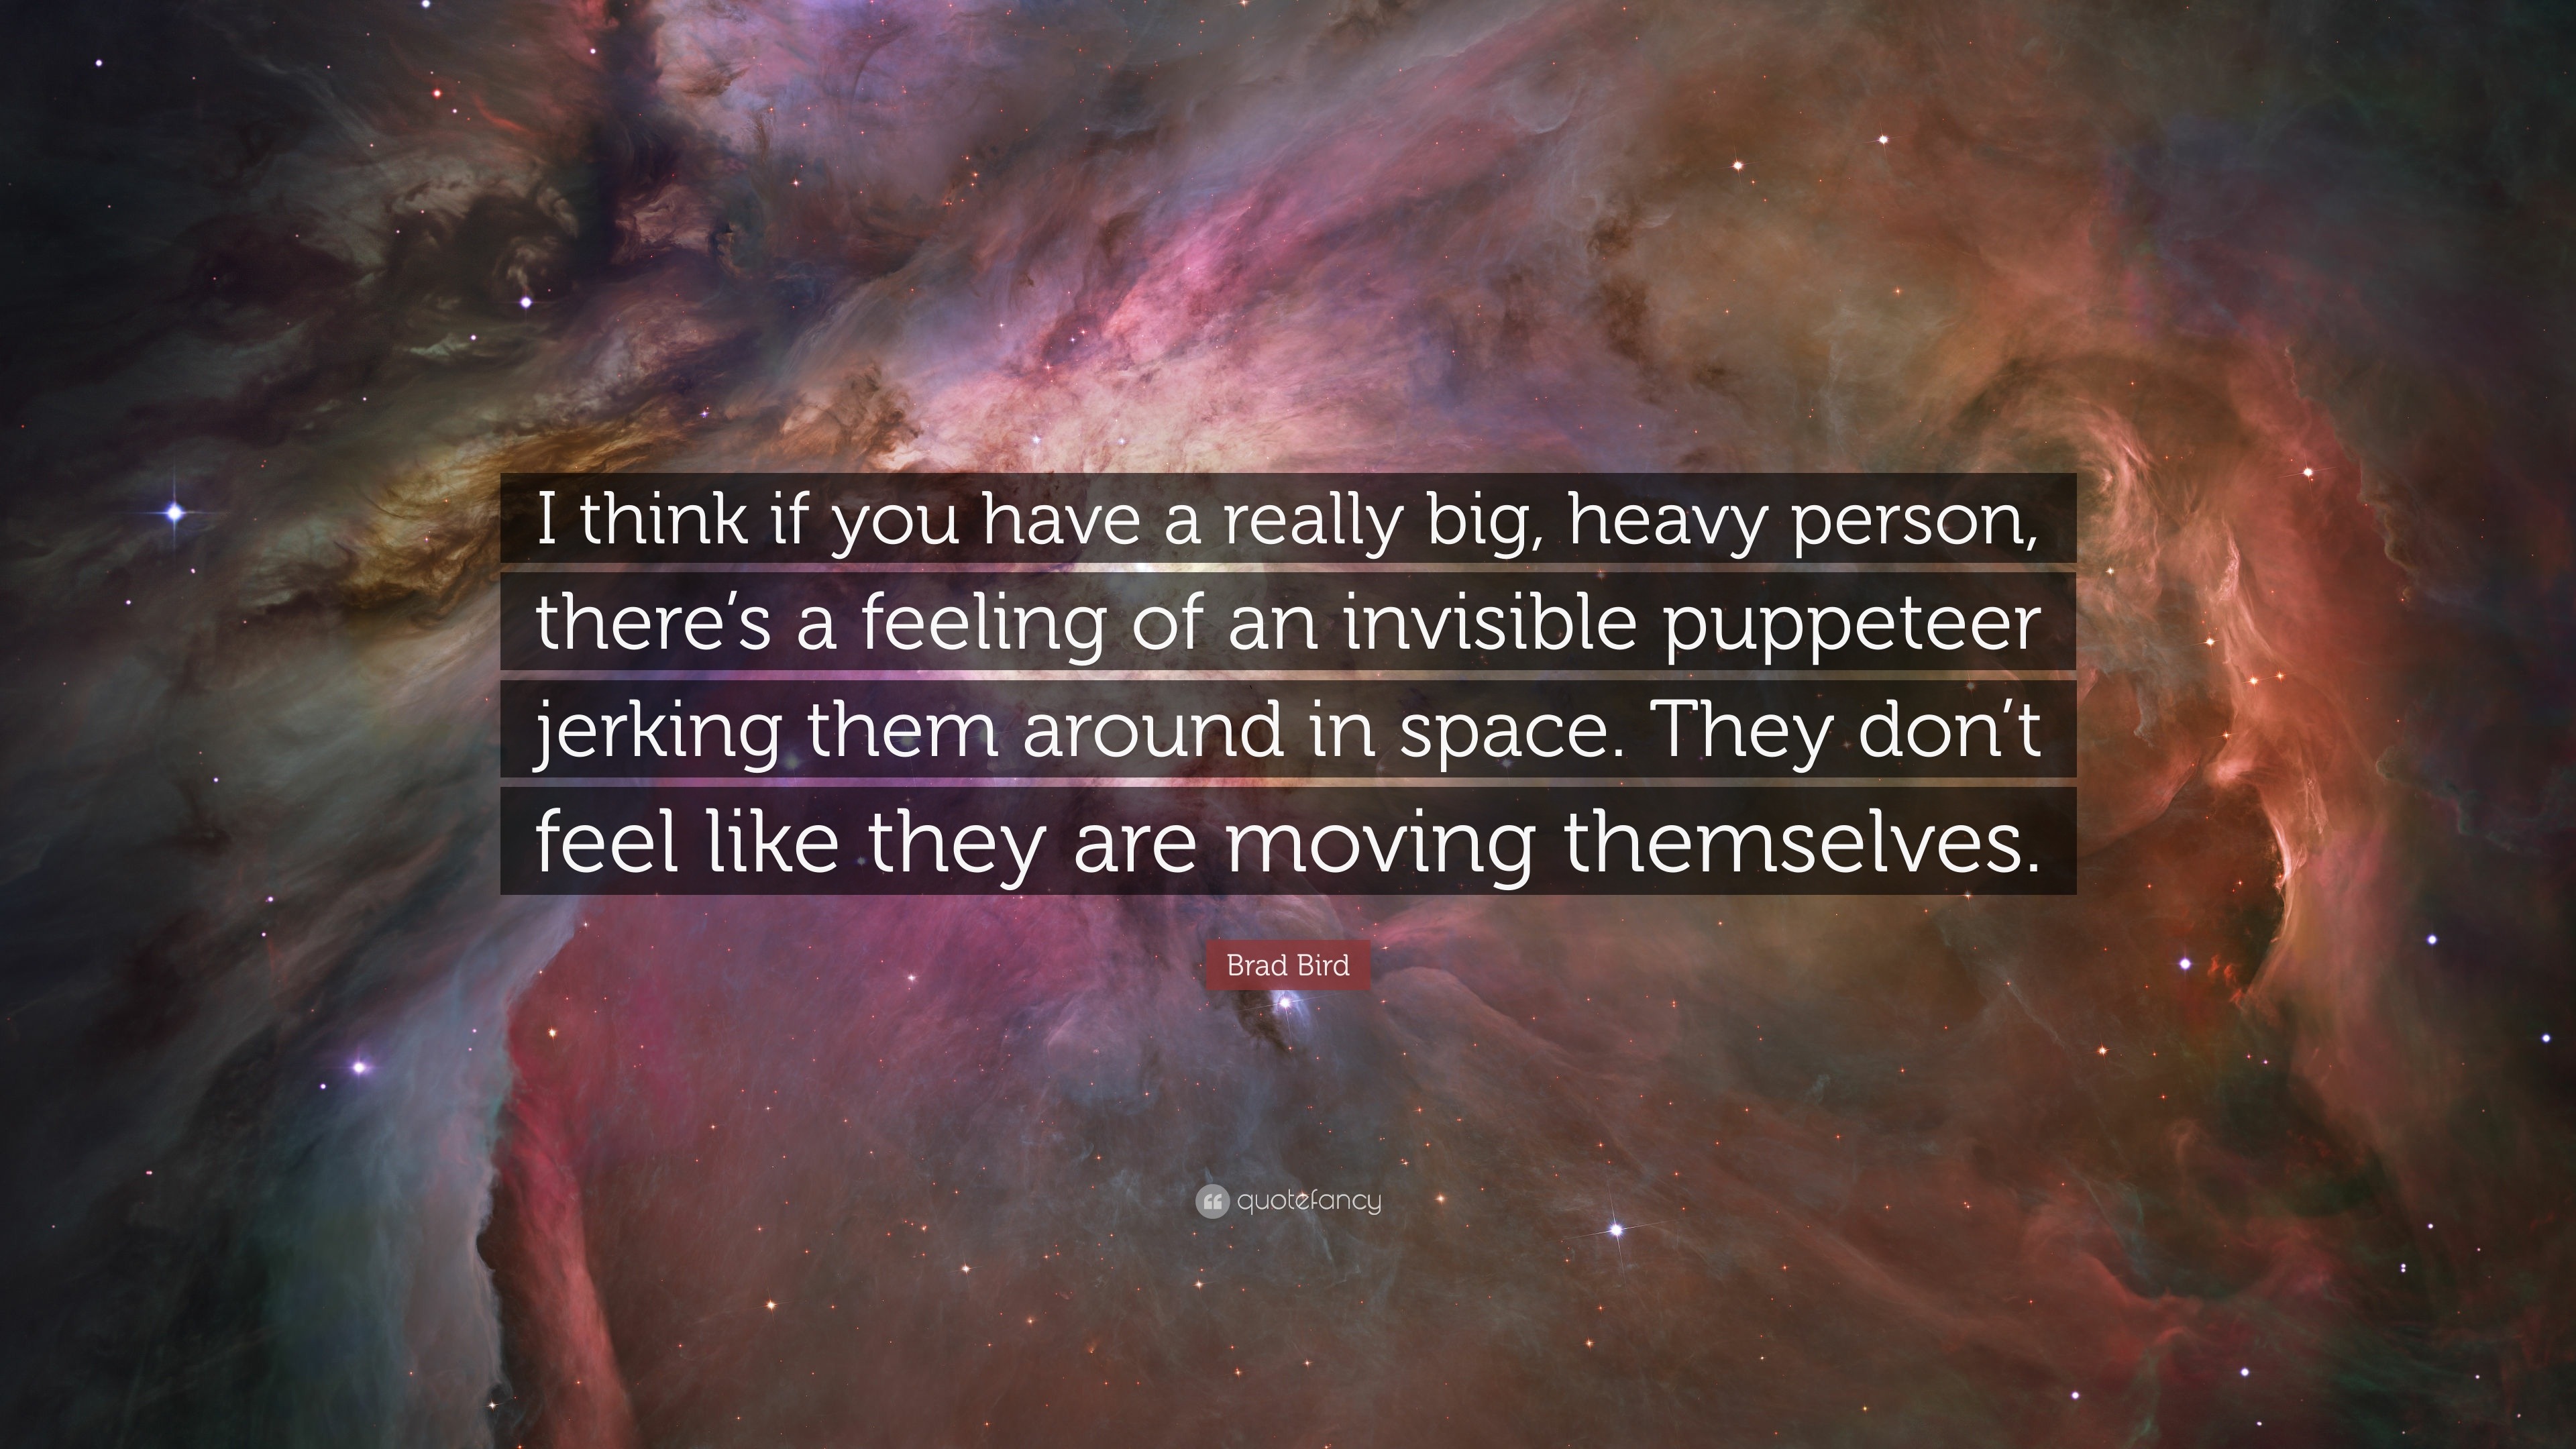 Brad Bird Quote: “I think if you have a really big, heavy person